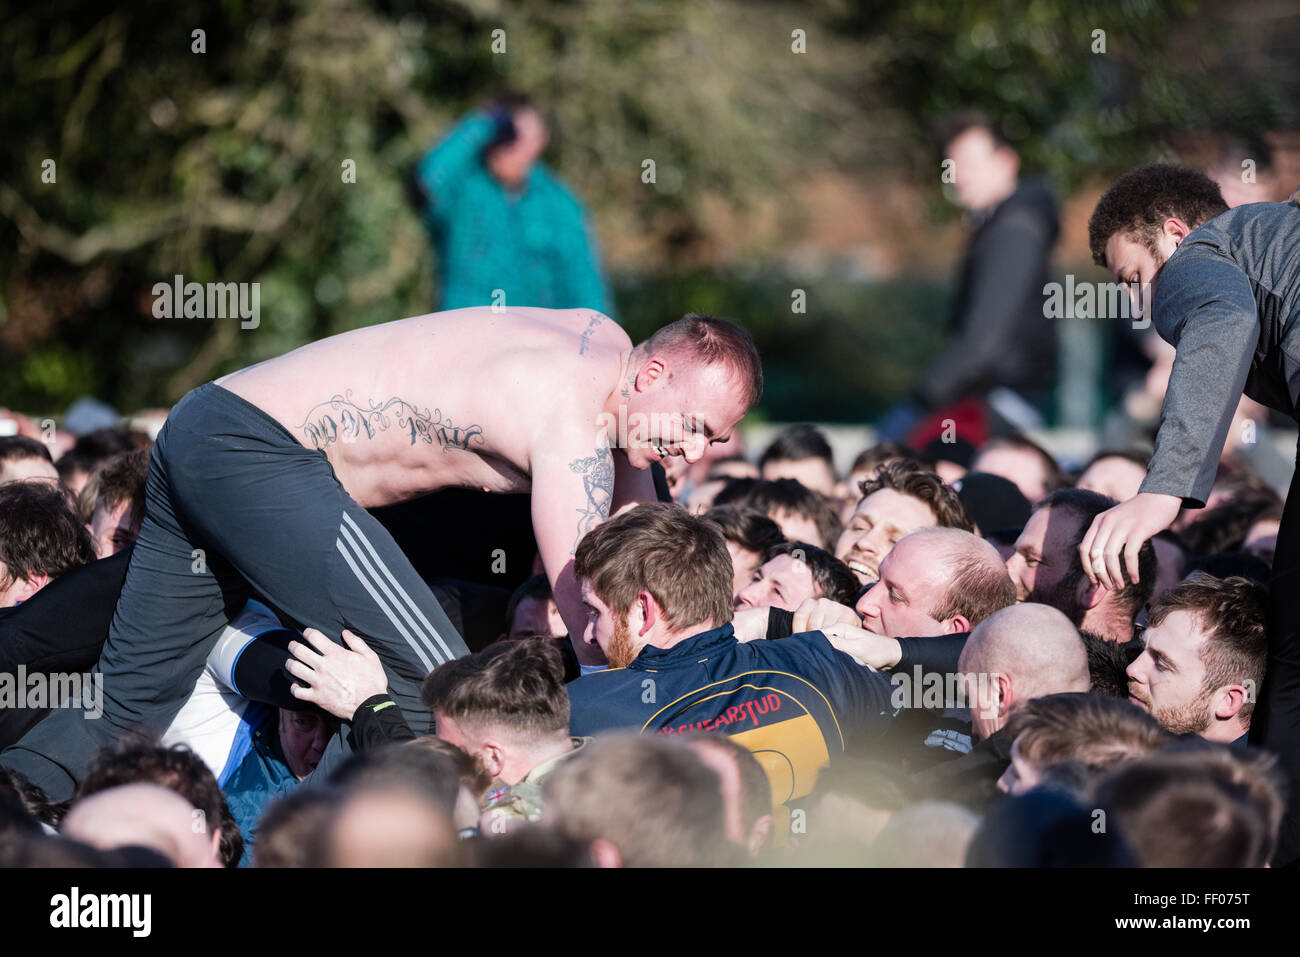 Ashbourne, Derbyshire, UK. 9th February, 2016.Thousands fill the streets of Ashbourne for the annual 2 day royal shrovetide football match. Credit:  Ian Francis/Alamy Live News Stock Photo